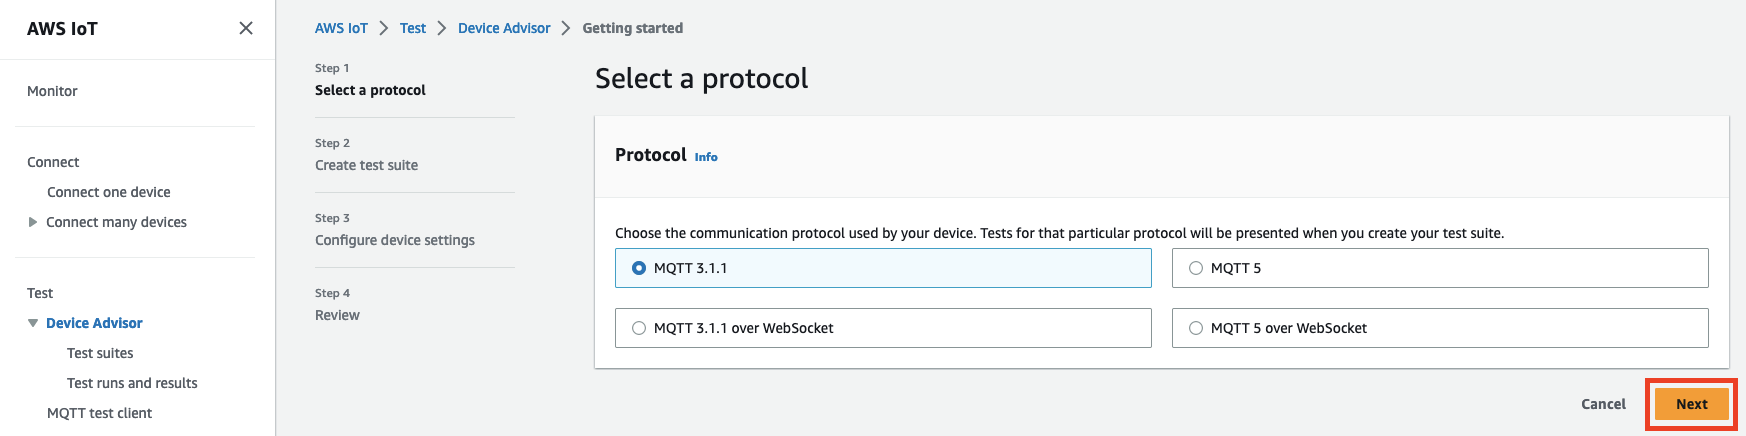 
                        
                            Device Advisor interface showing options to select a communication protocol (MQTT 3.1.1, 
                            MQTT 3.1.1 over WebSocket, MQTT 5, MQTT 5 over WebSocket) for testing an IoT device.
                        
                    